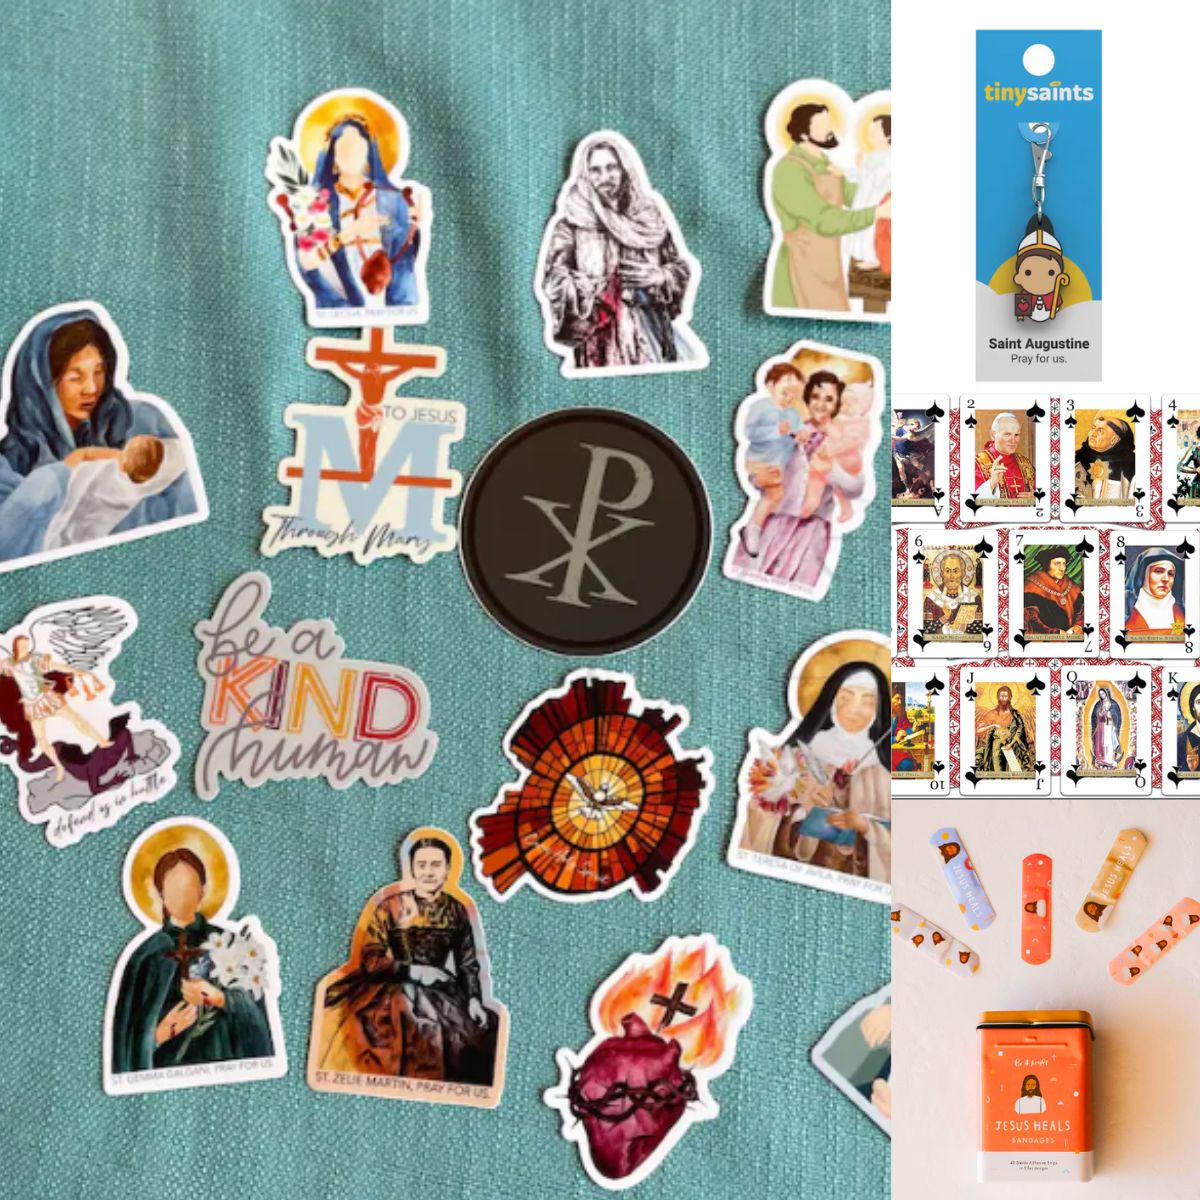 The photo collage shows several simple gifts for teens including stickers, funny bandaids, and backpack decorations.